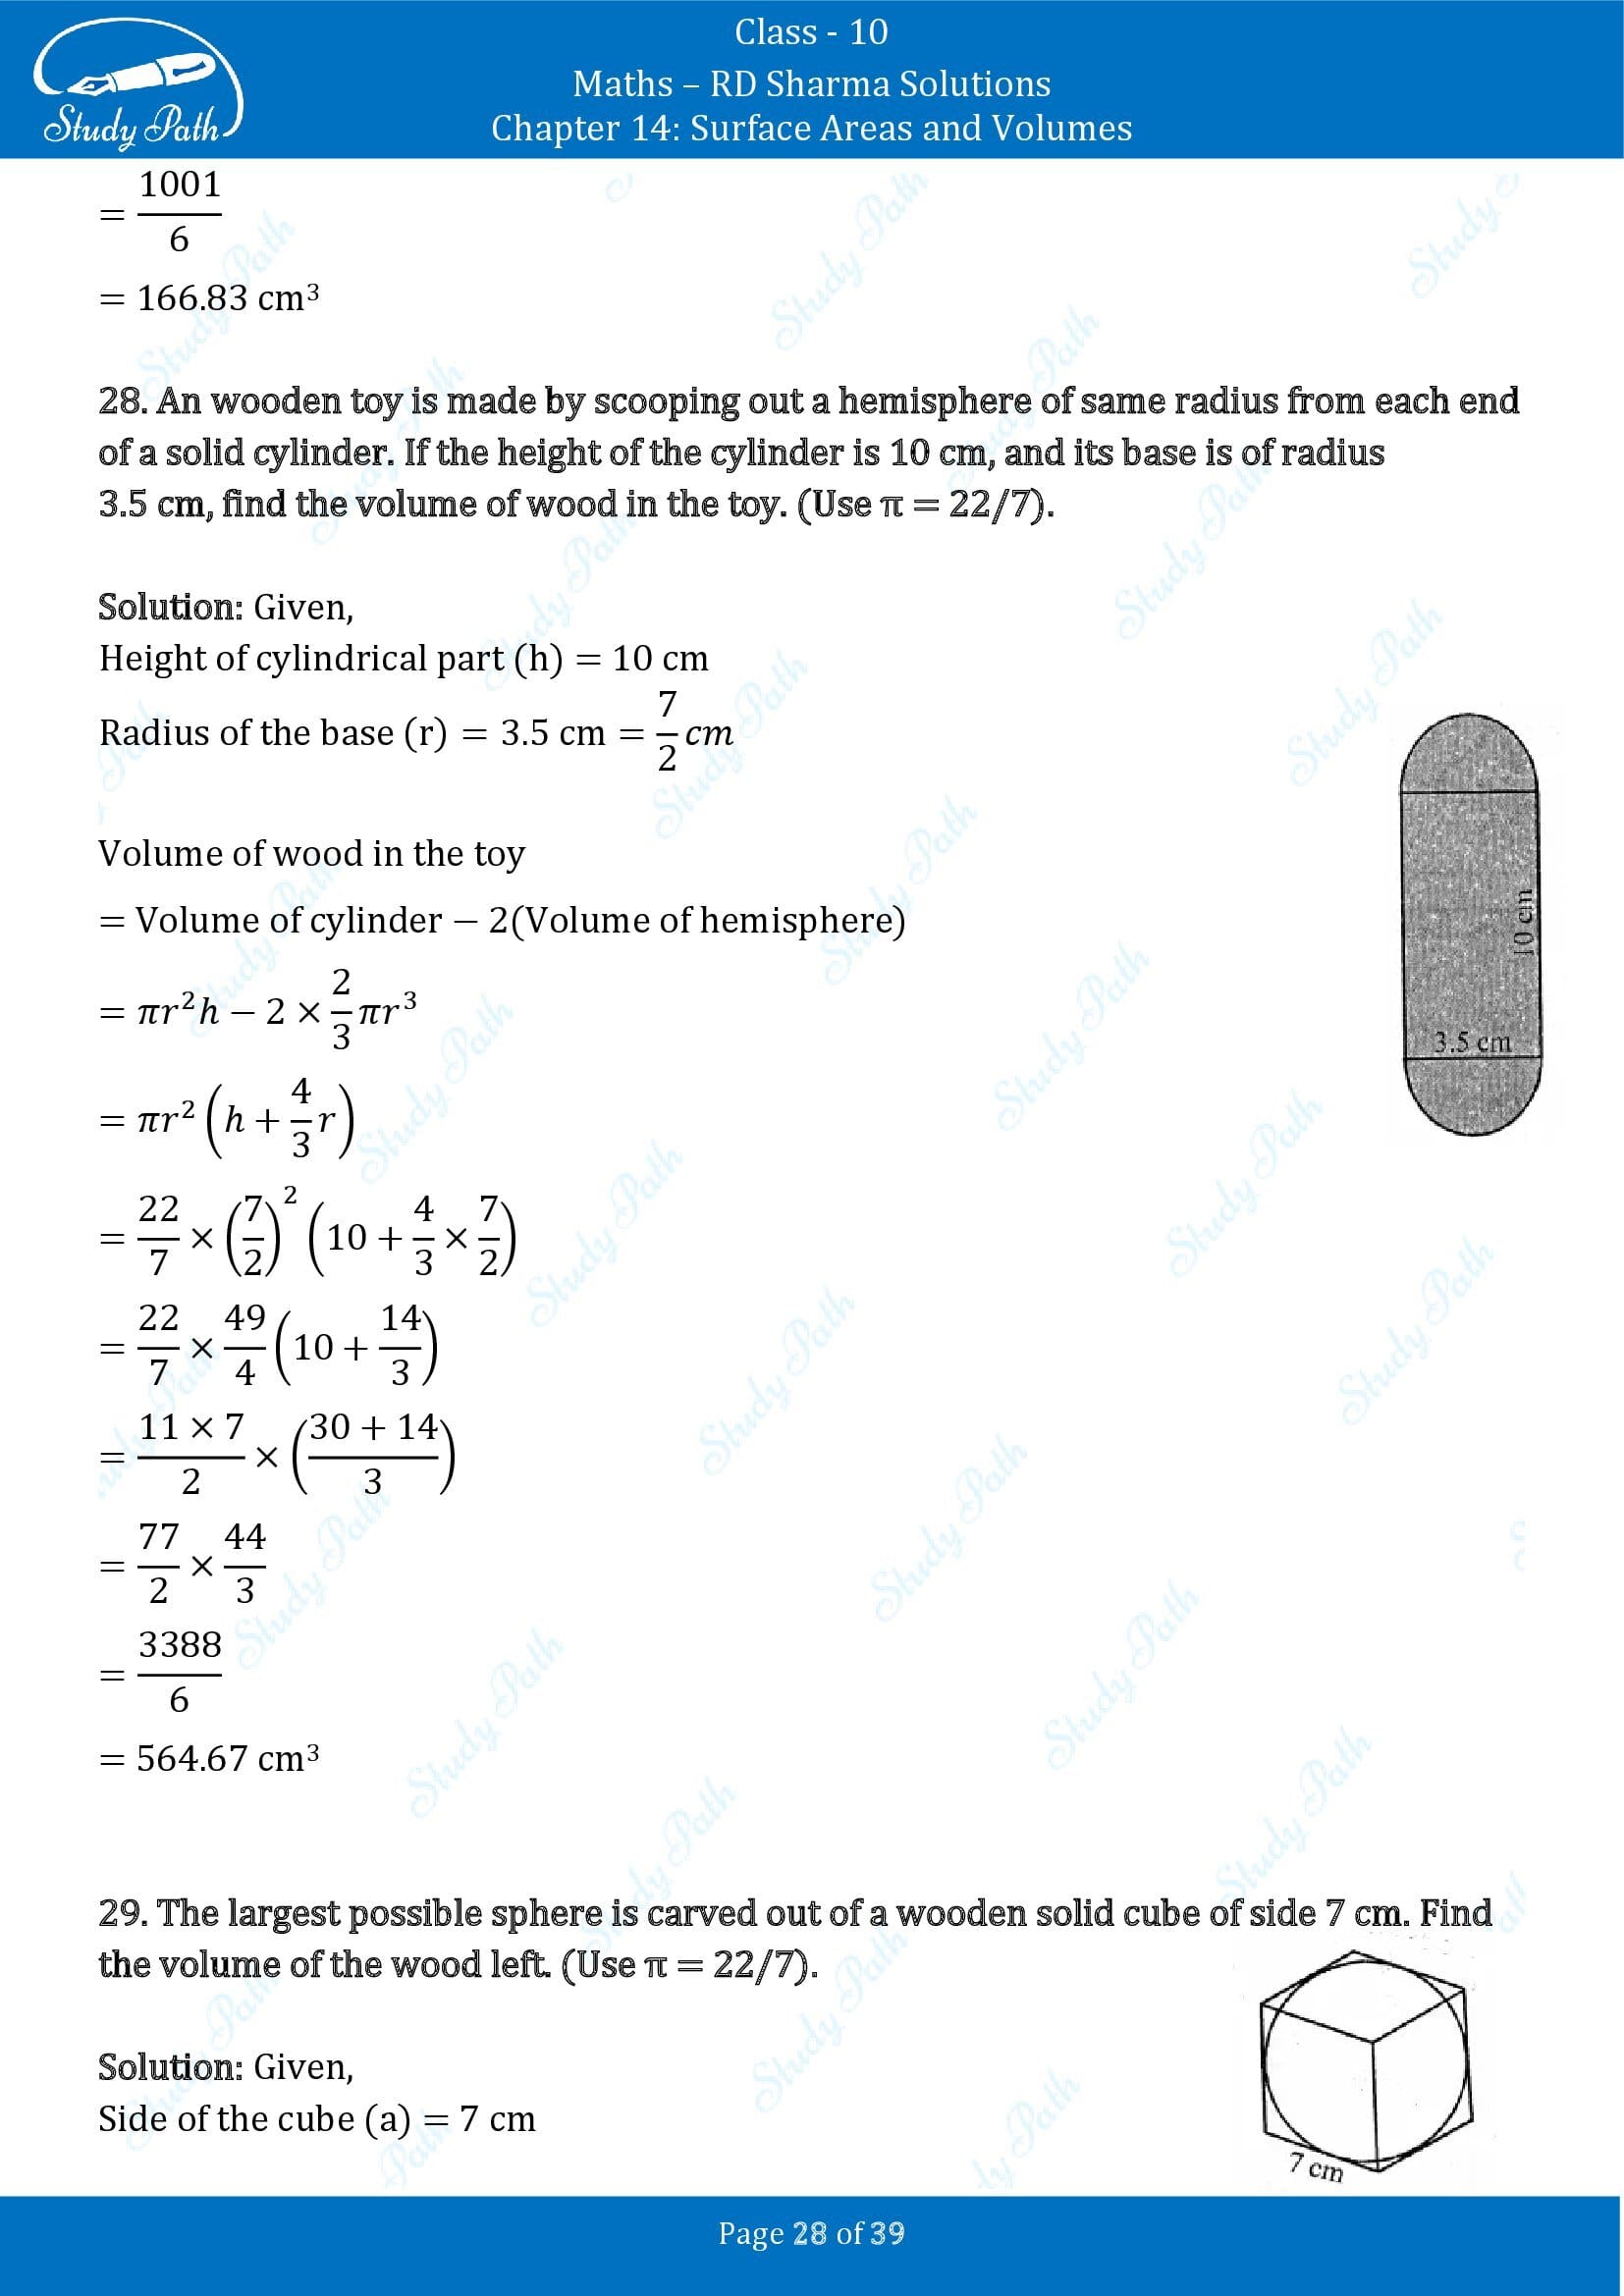 RD Sharma Solutions Class 10 Chapter 14 Surface Areas and Volumes Exercise 14.2 00028